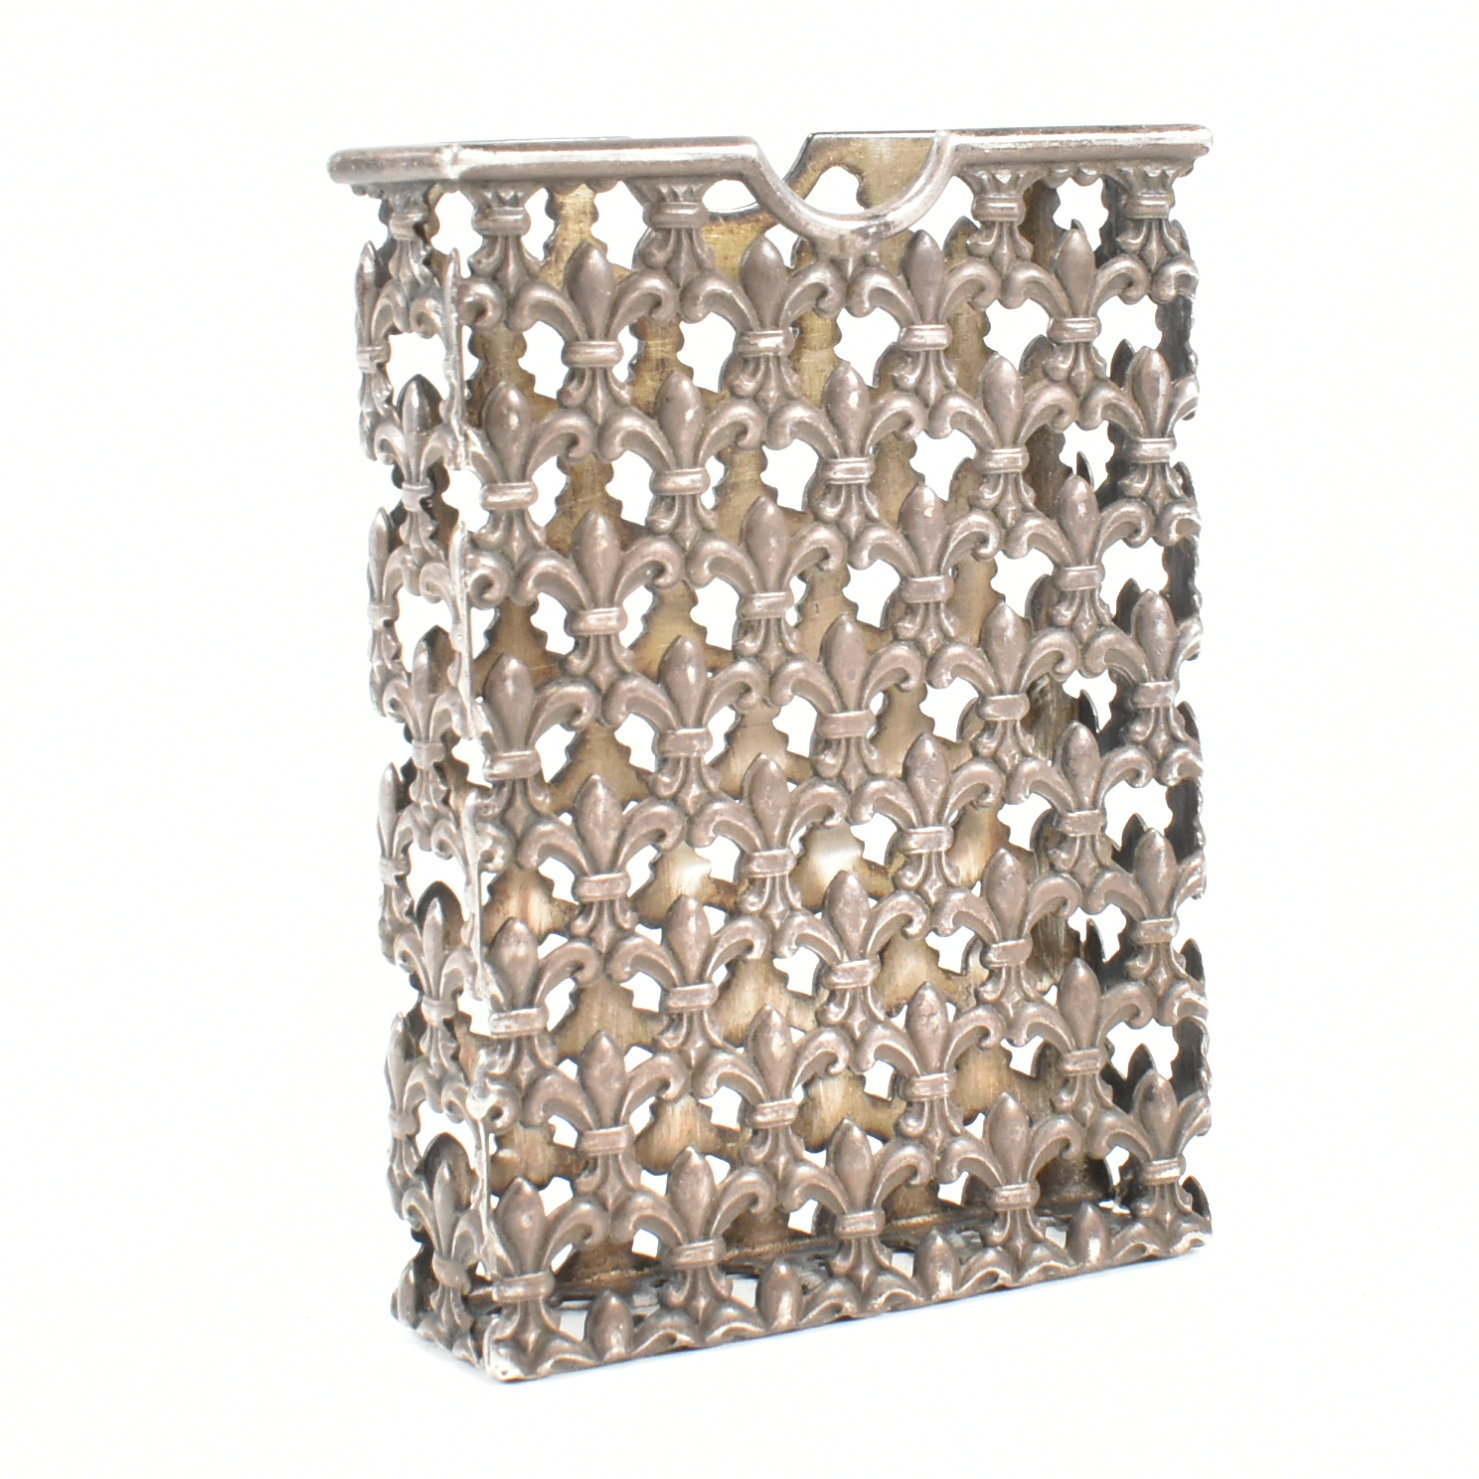 STERLING SILVER PLAYING CARD CASE - Image 3 of 8